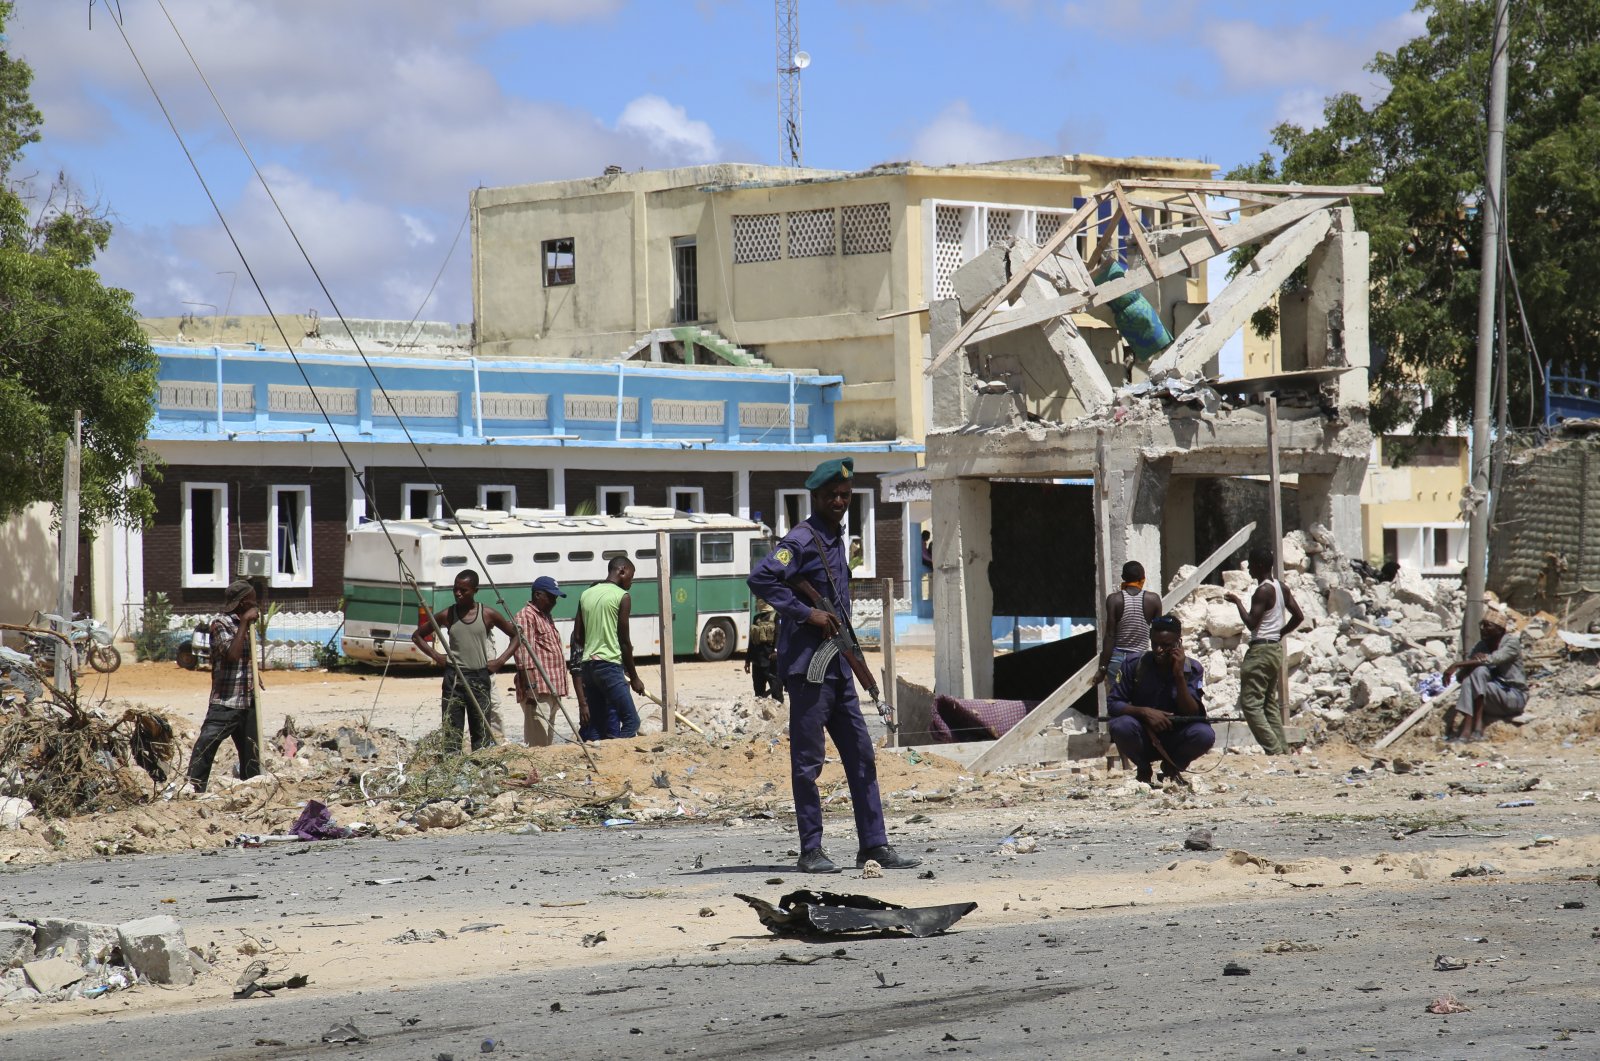 A Somali soldier guards the site of the bomb blast in Mogadishu Somalia, Wednesday April 28, 2021. (AP File Photo)